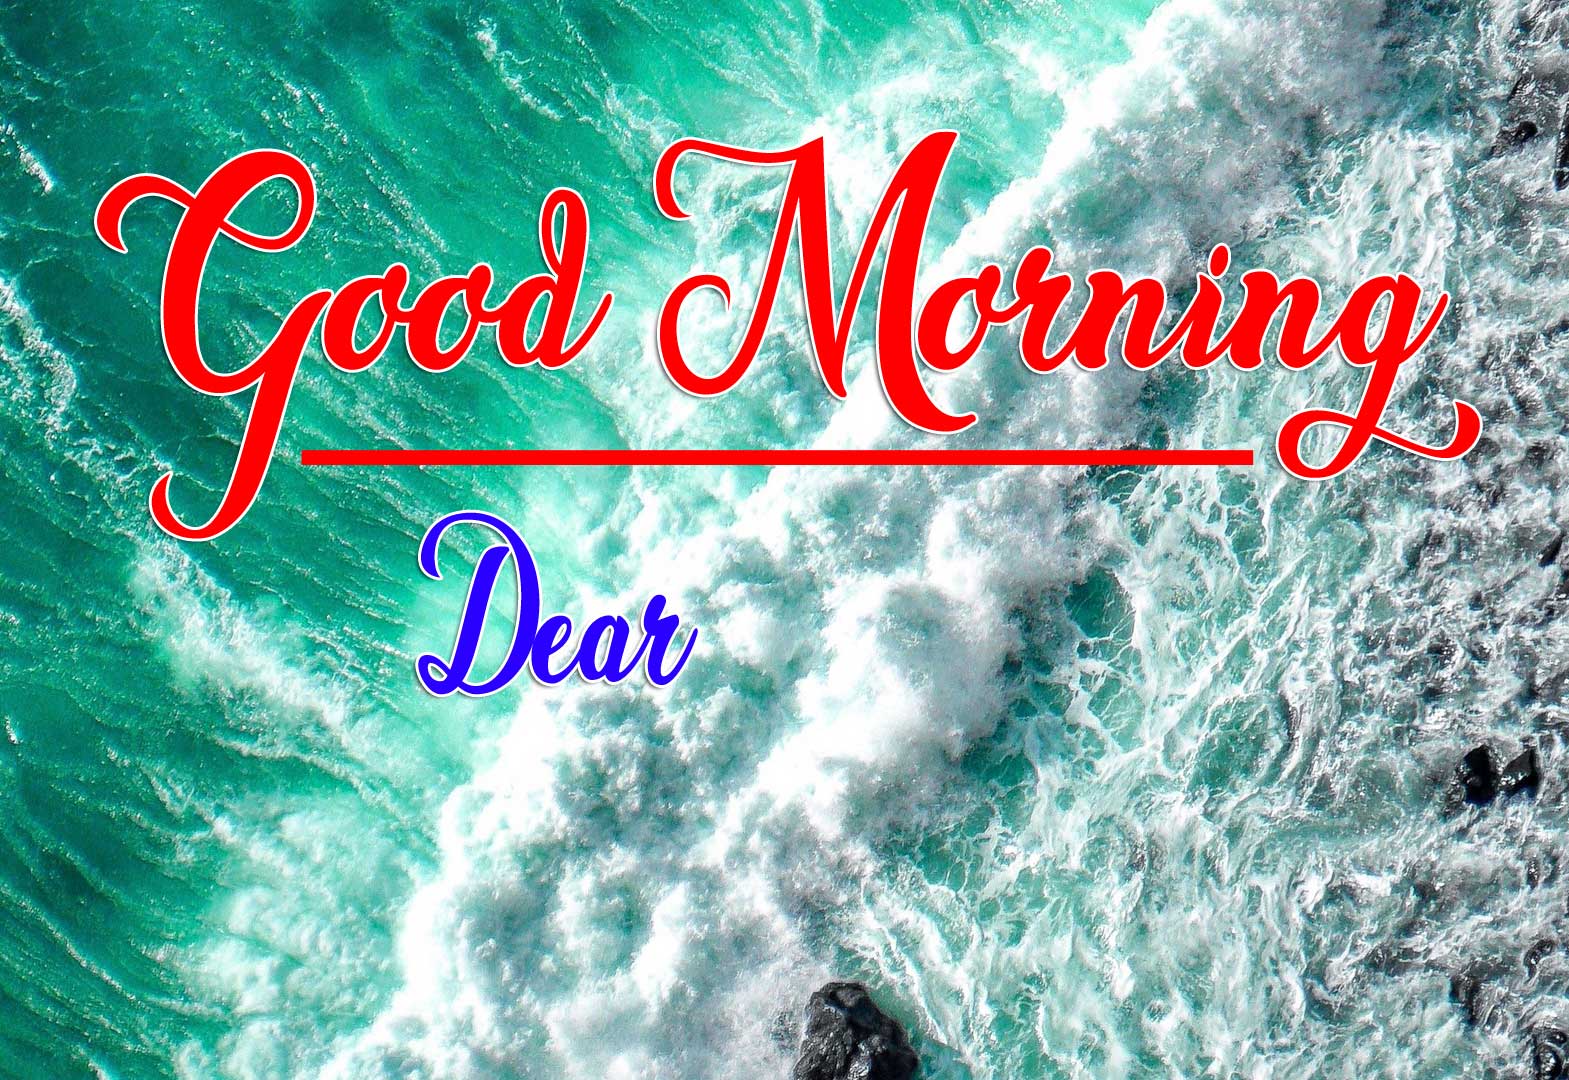 Good Morning Wishes Wallpaper Free Download 